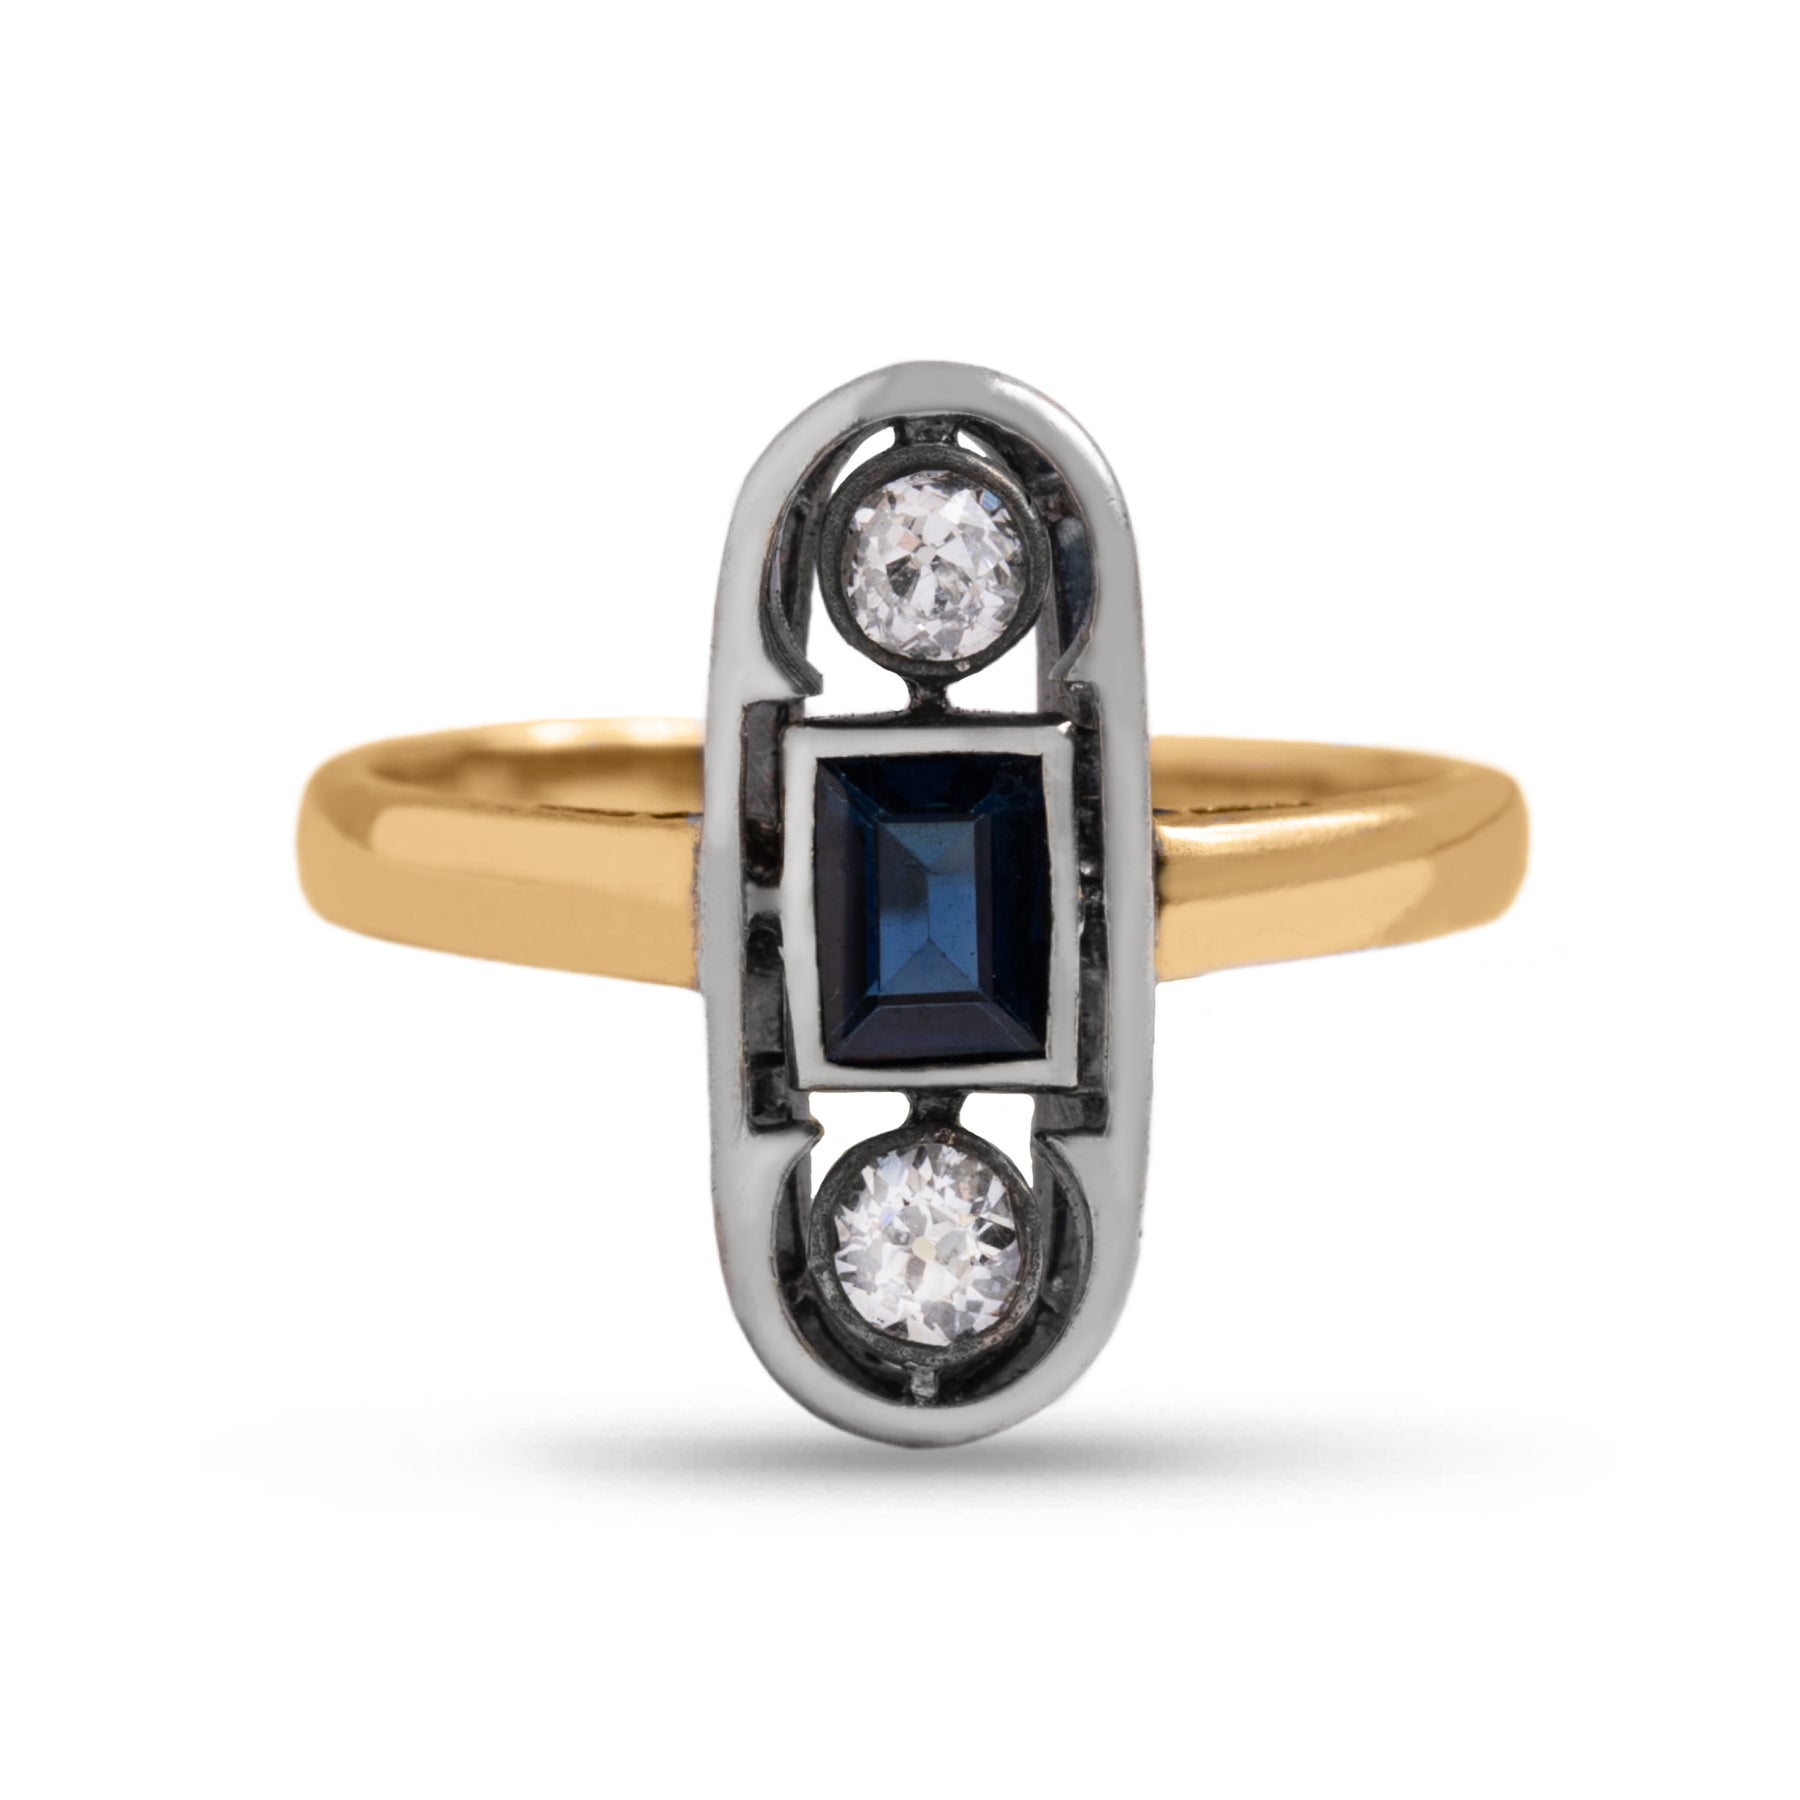 14k yellow gold and sterling silver estate diamond and sapphire ring